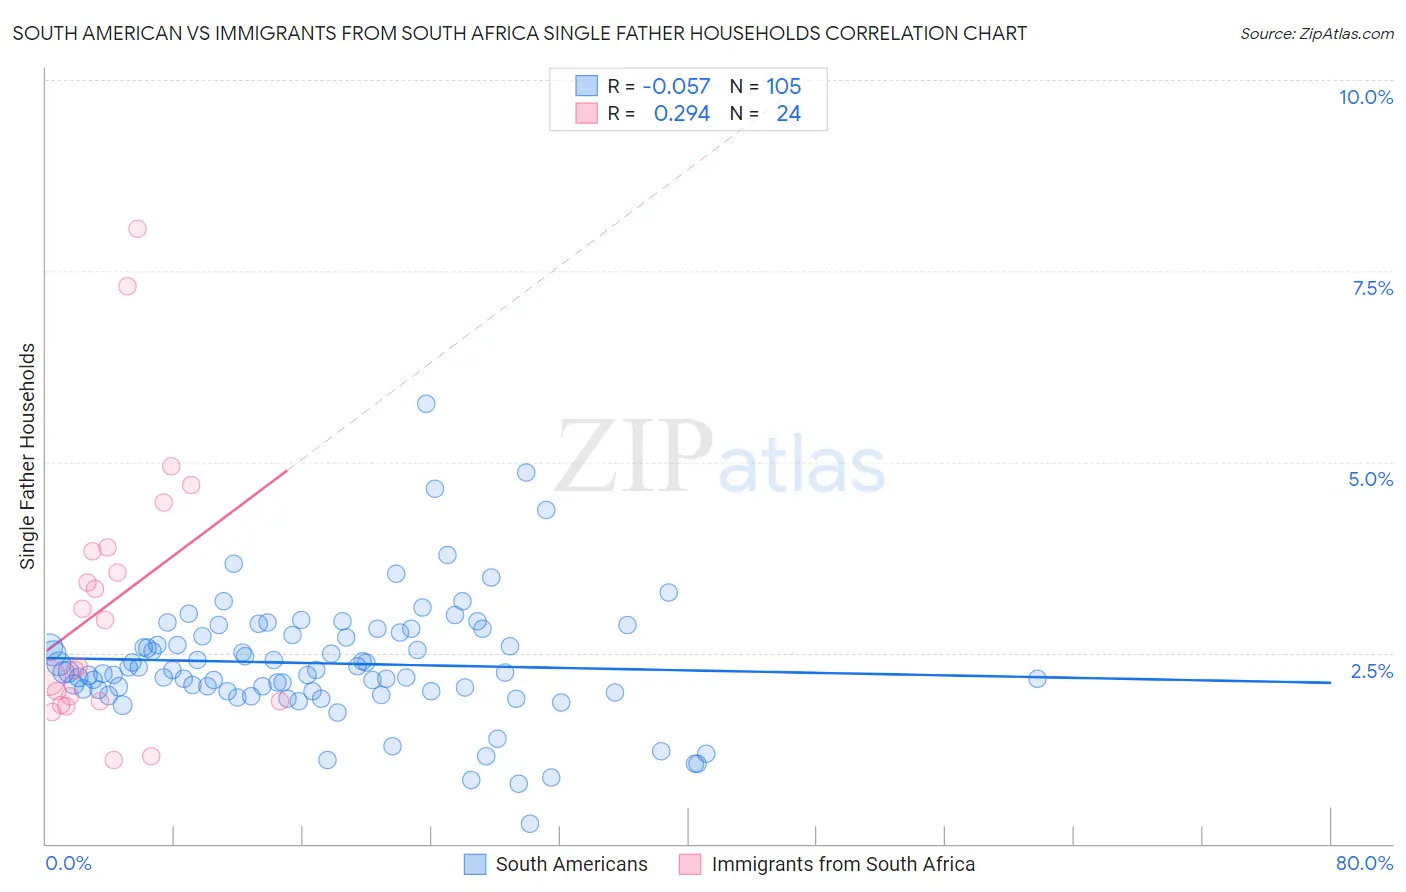 South American vs Immigrants from South Africa Single Father Households